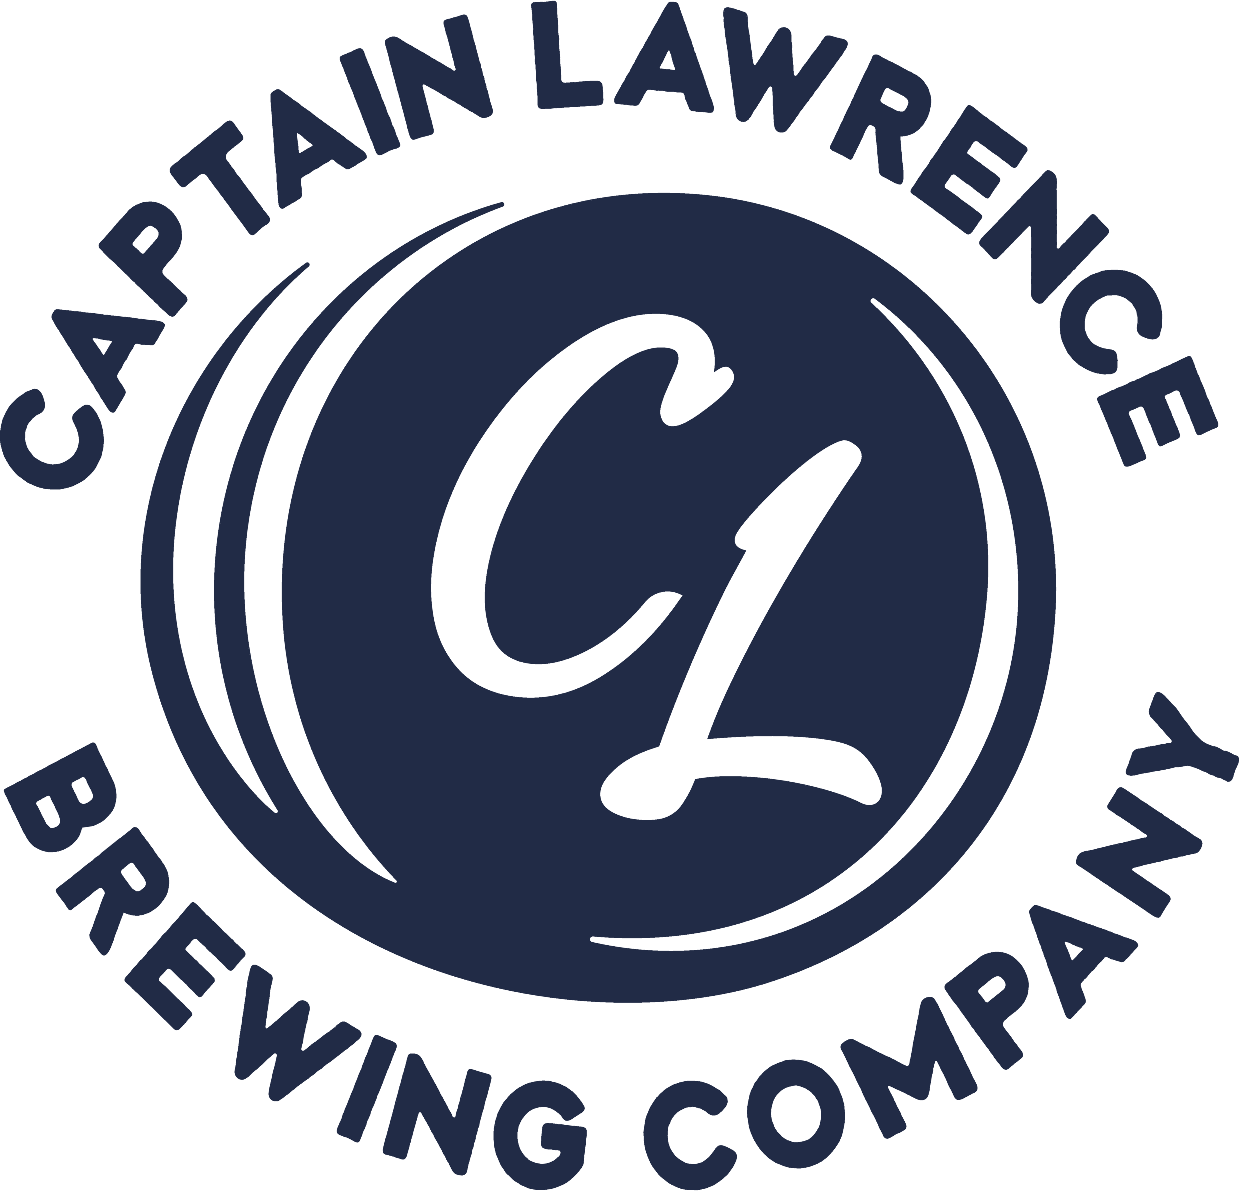 Captain Lawrence Brewing Co.